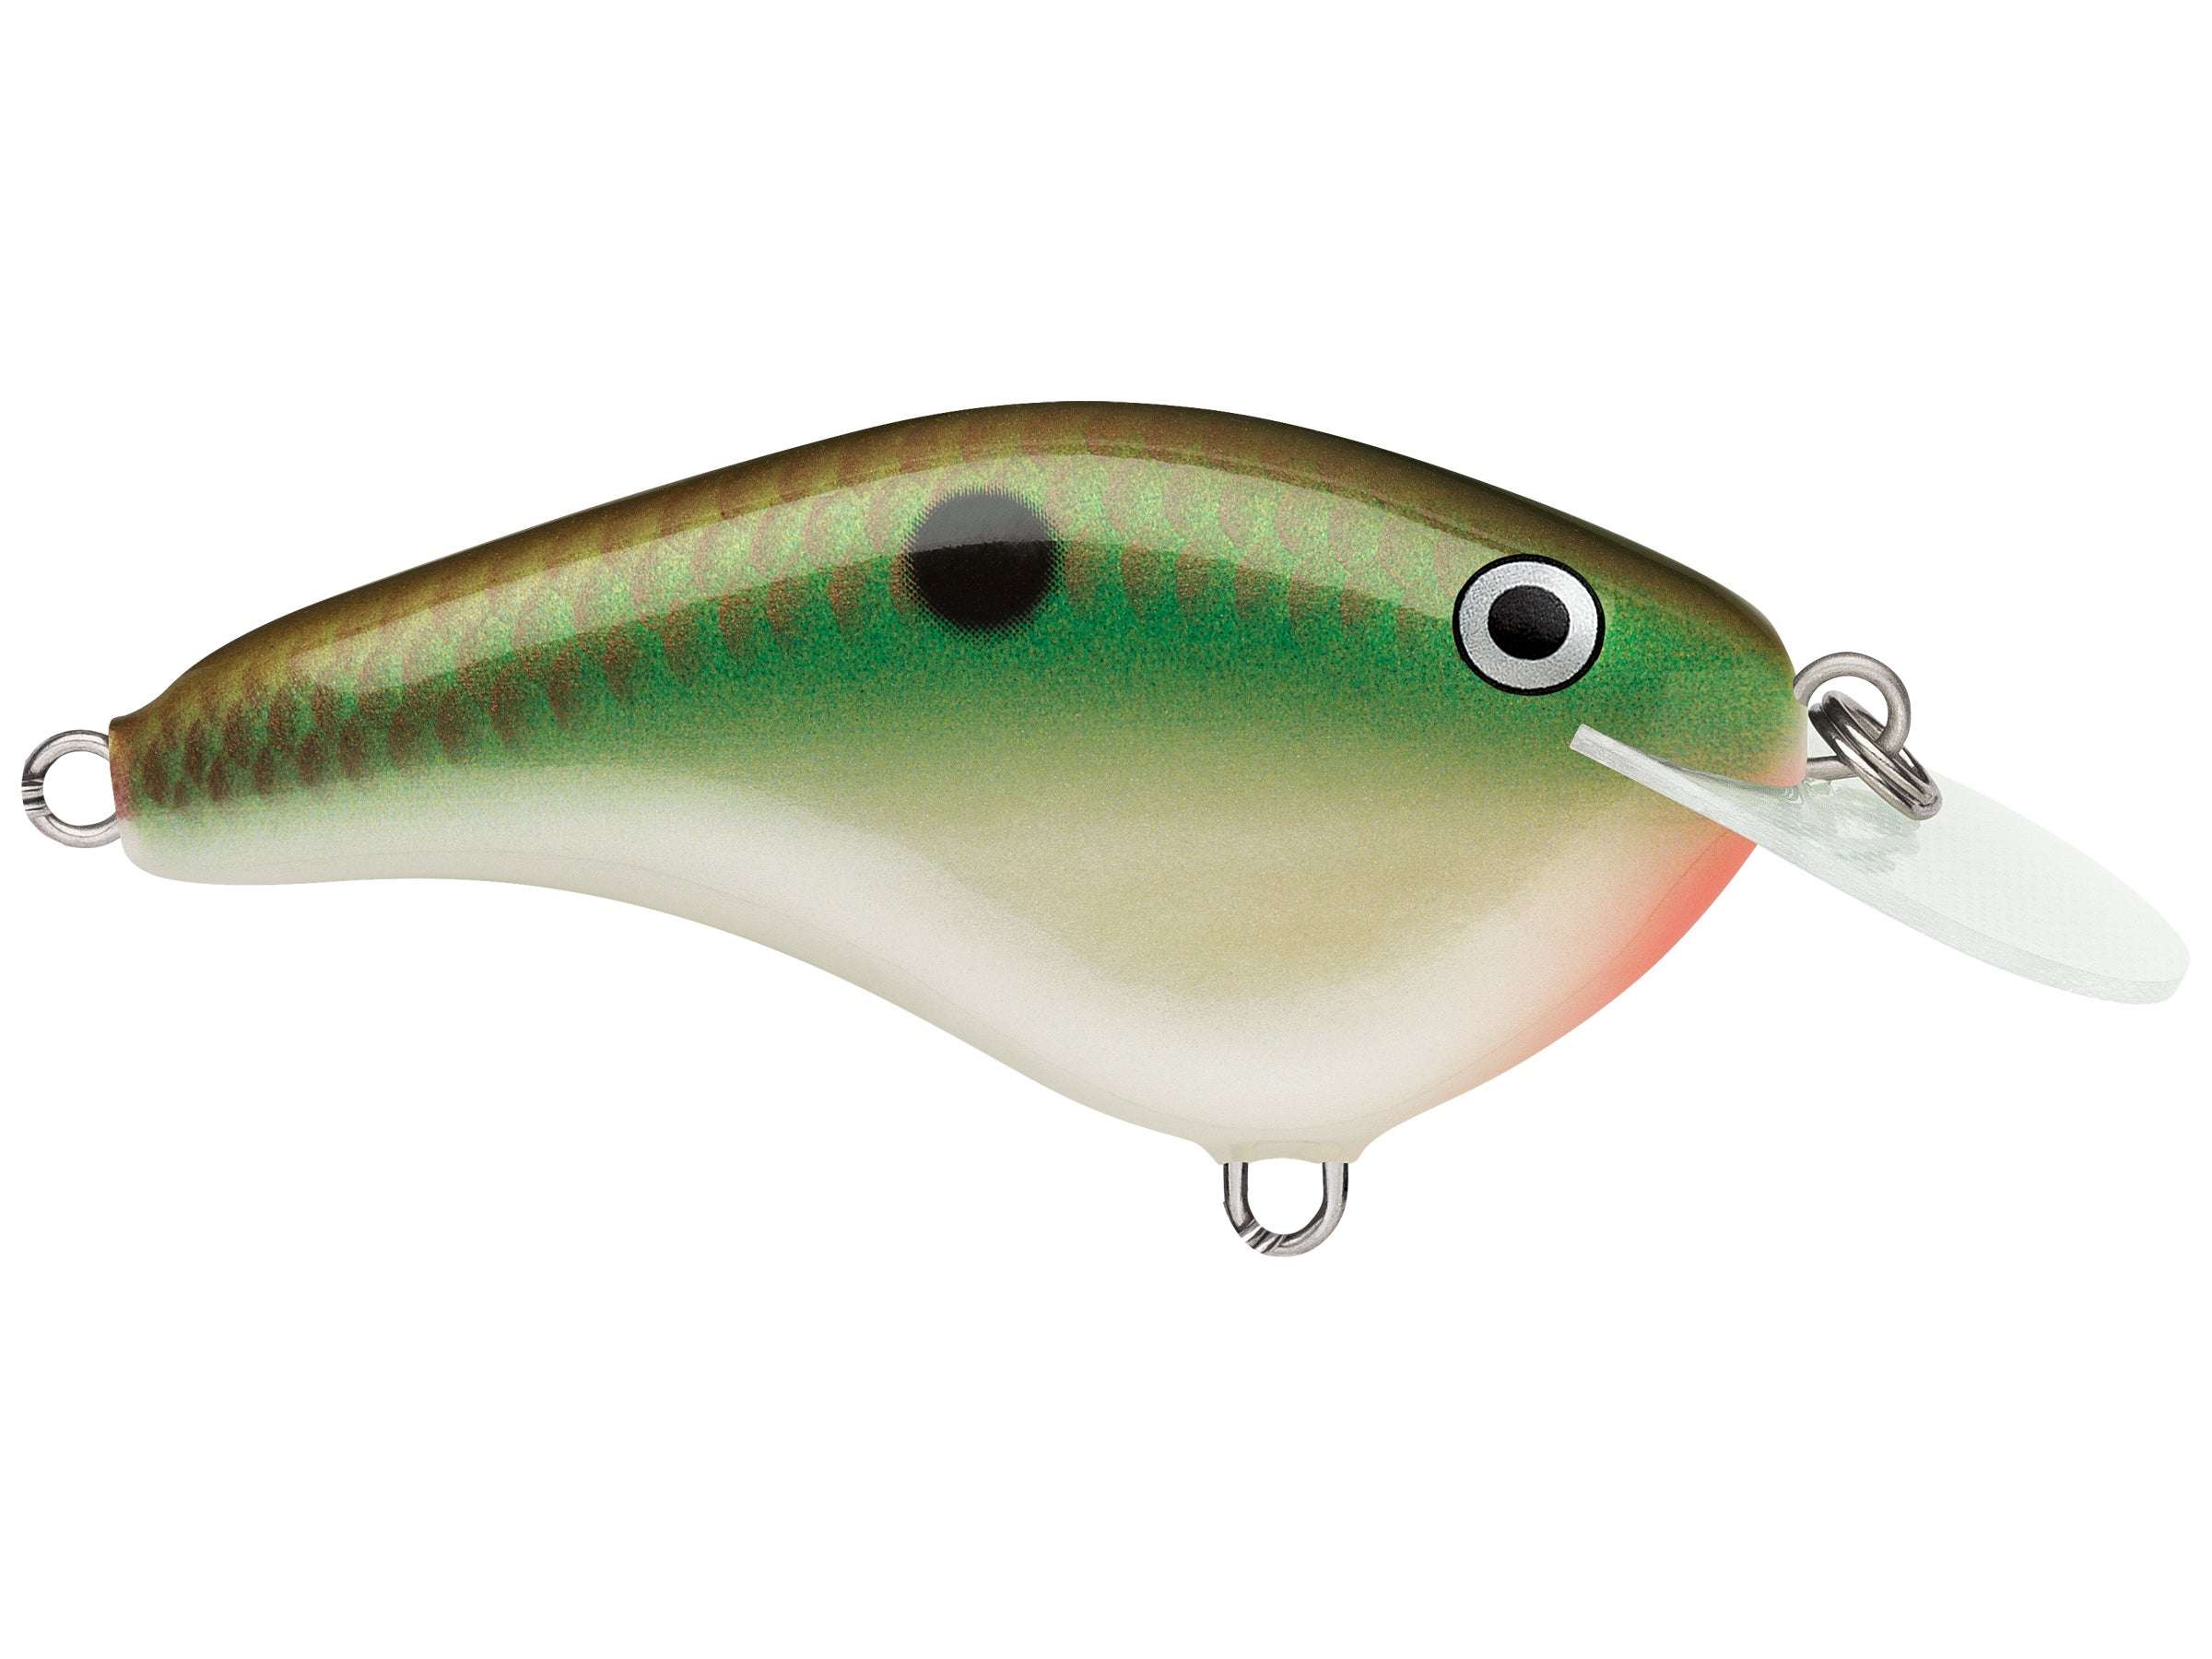 <p><strong>Rapala Ott's Garage Slim 06 Crankbait</strong><br> As previously mentioned, a balsa crankbait is always going to be a prominent player in the fall months which makes the Rapala OG Slim 06 such a great option. The OG Slim made a big splash in the fishing industry just a year ago, and for good reason. It catches them. A smaller, 04 size will soon be released as well. <a href=